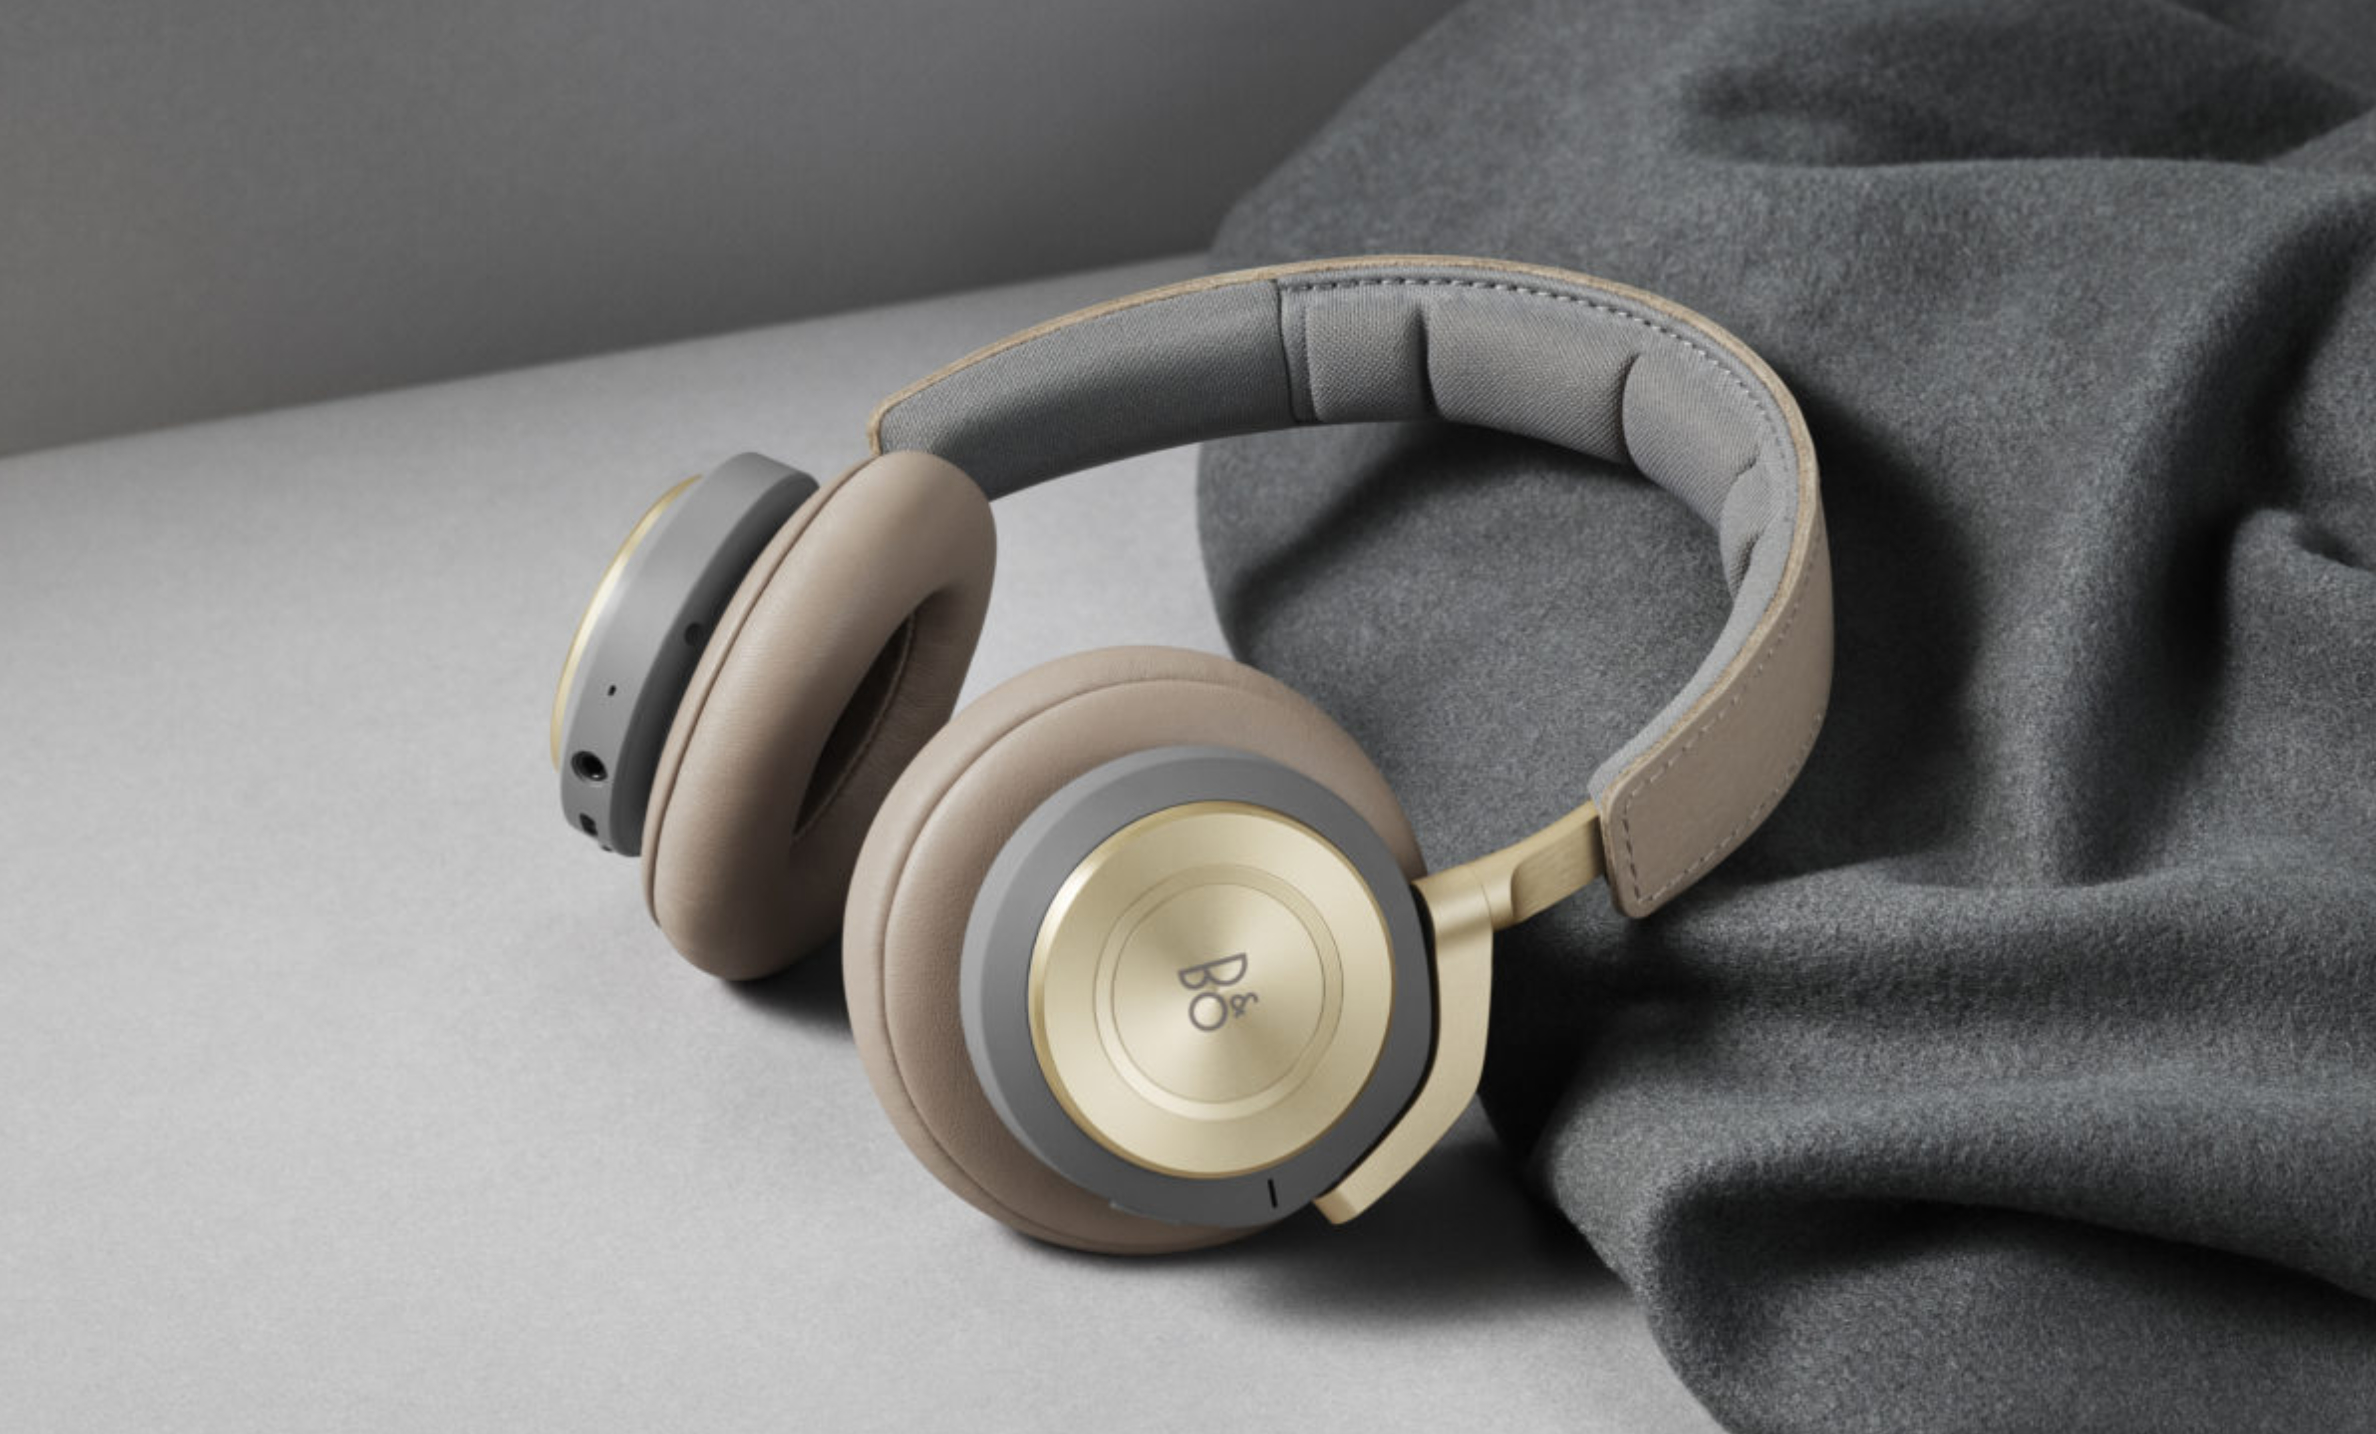 Bang & Olufsen kicks off its digital strategy with commercetools